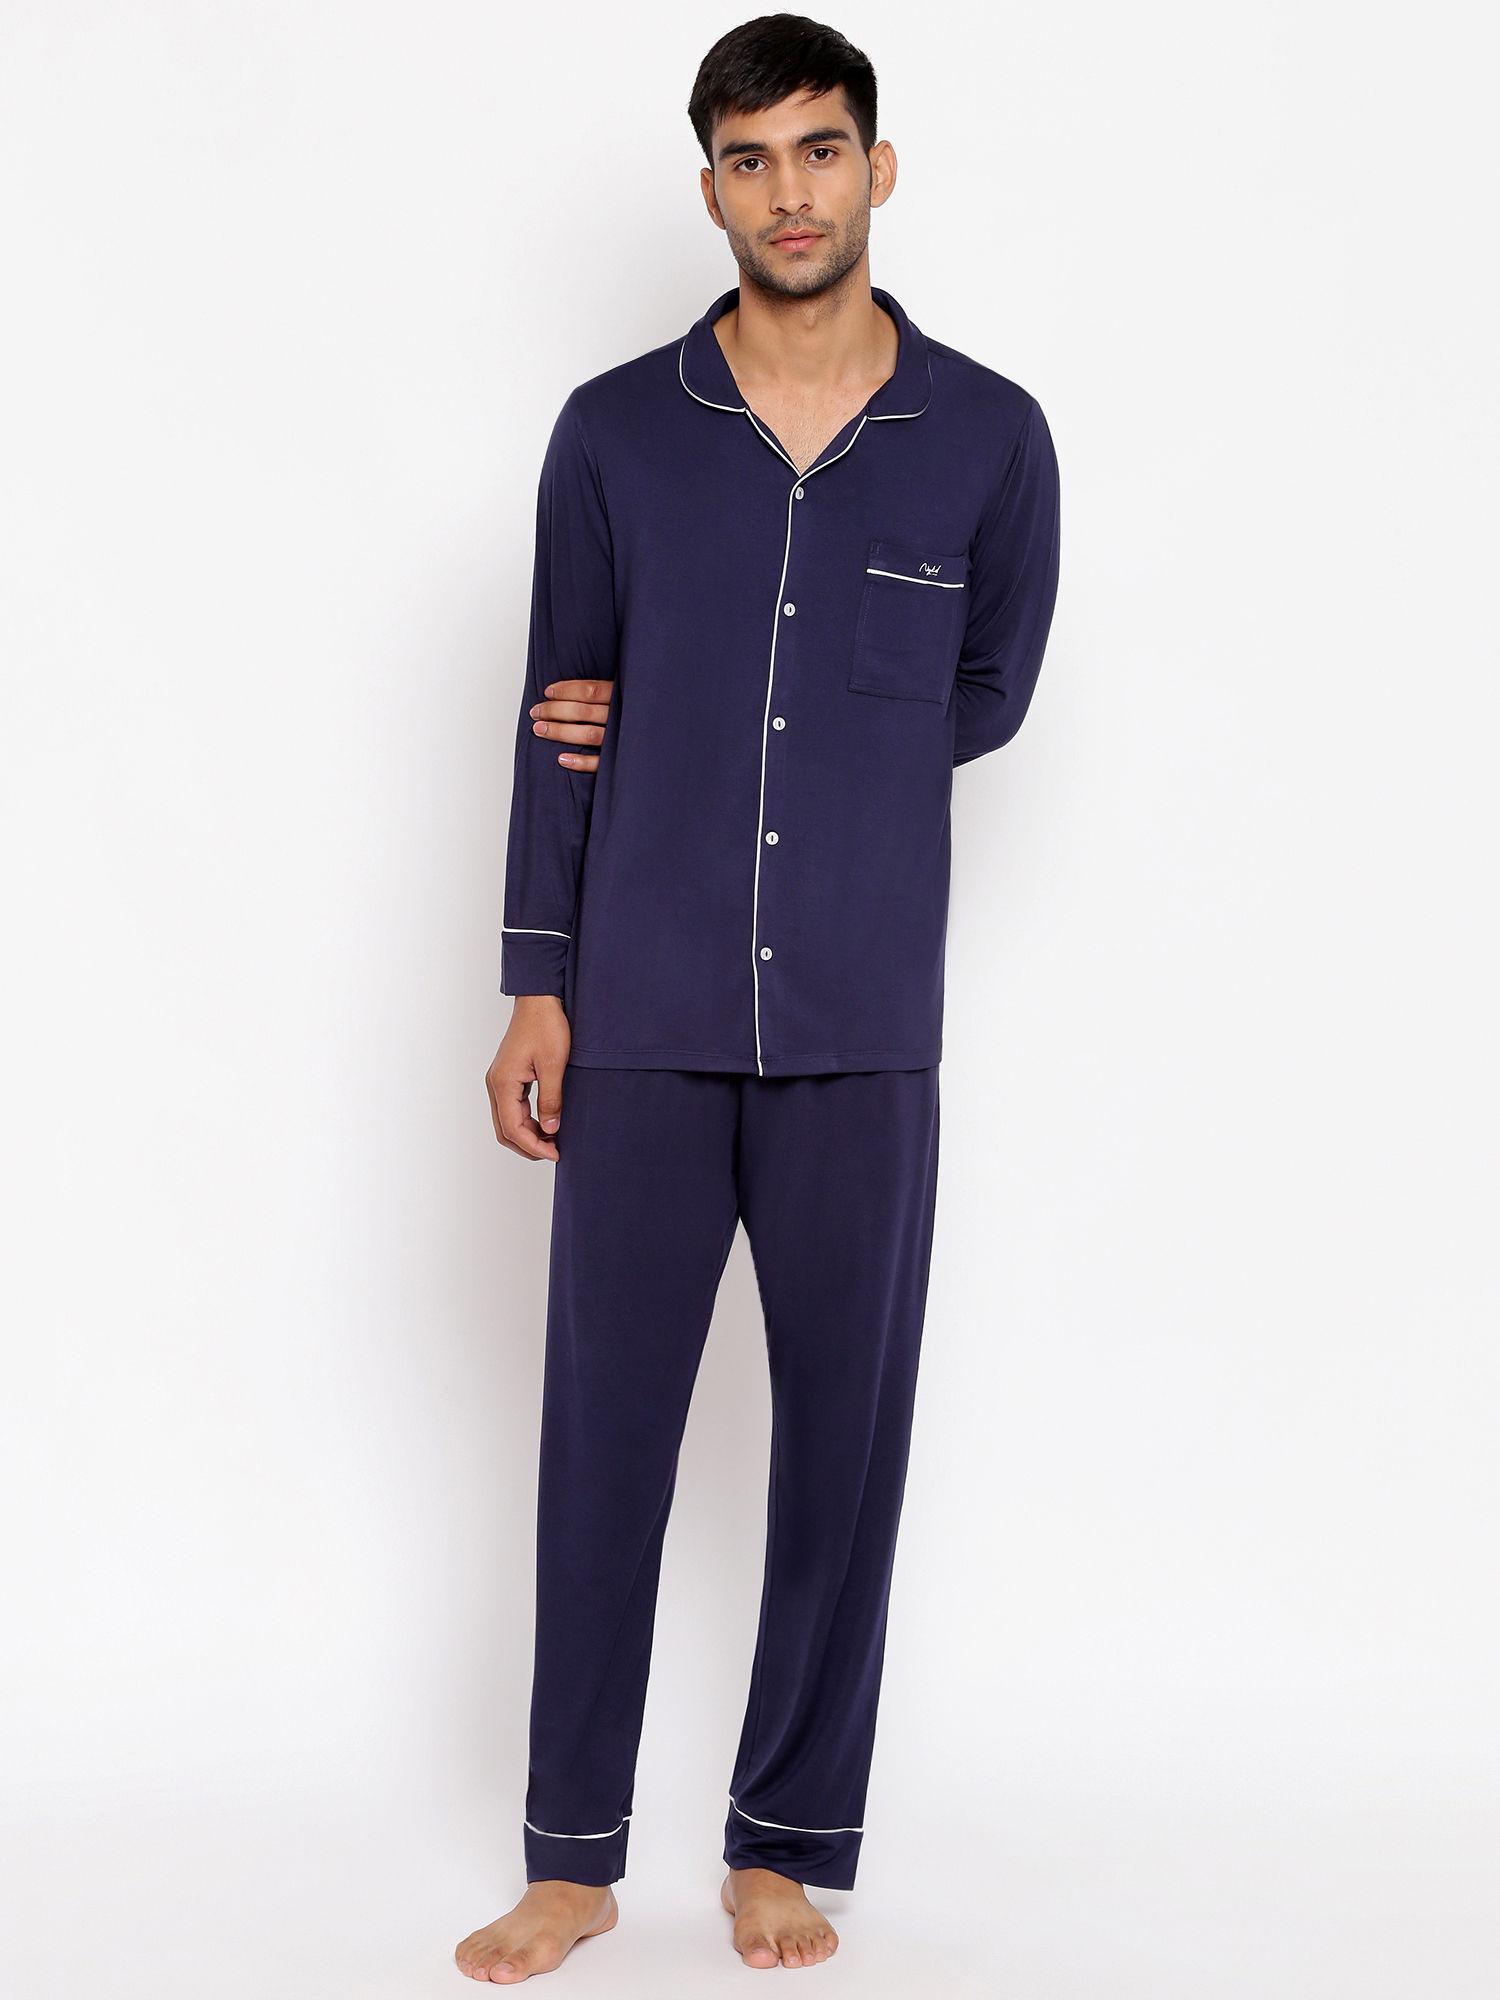 Sumptuously Soft Button Down Mens Pajama Set - Navy NYS027